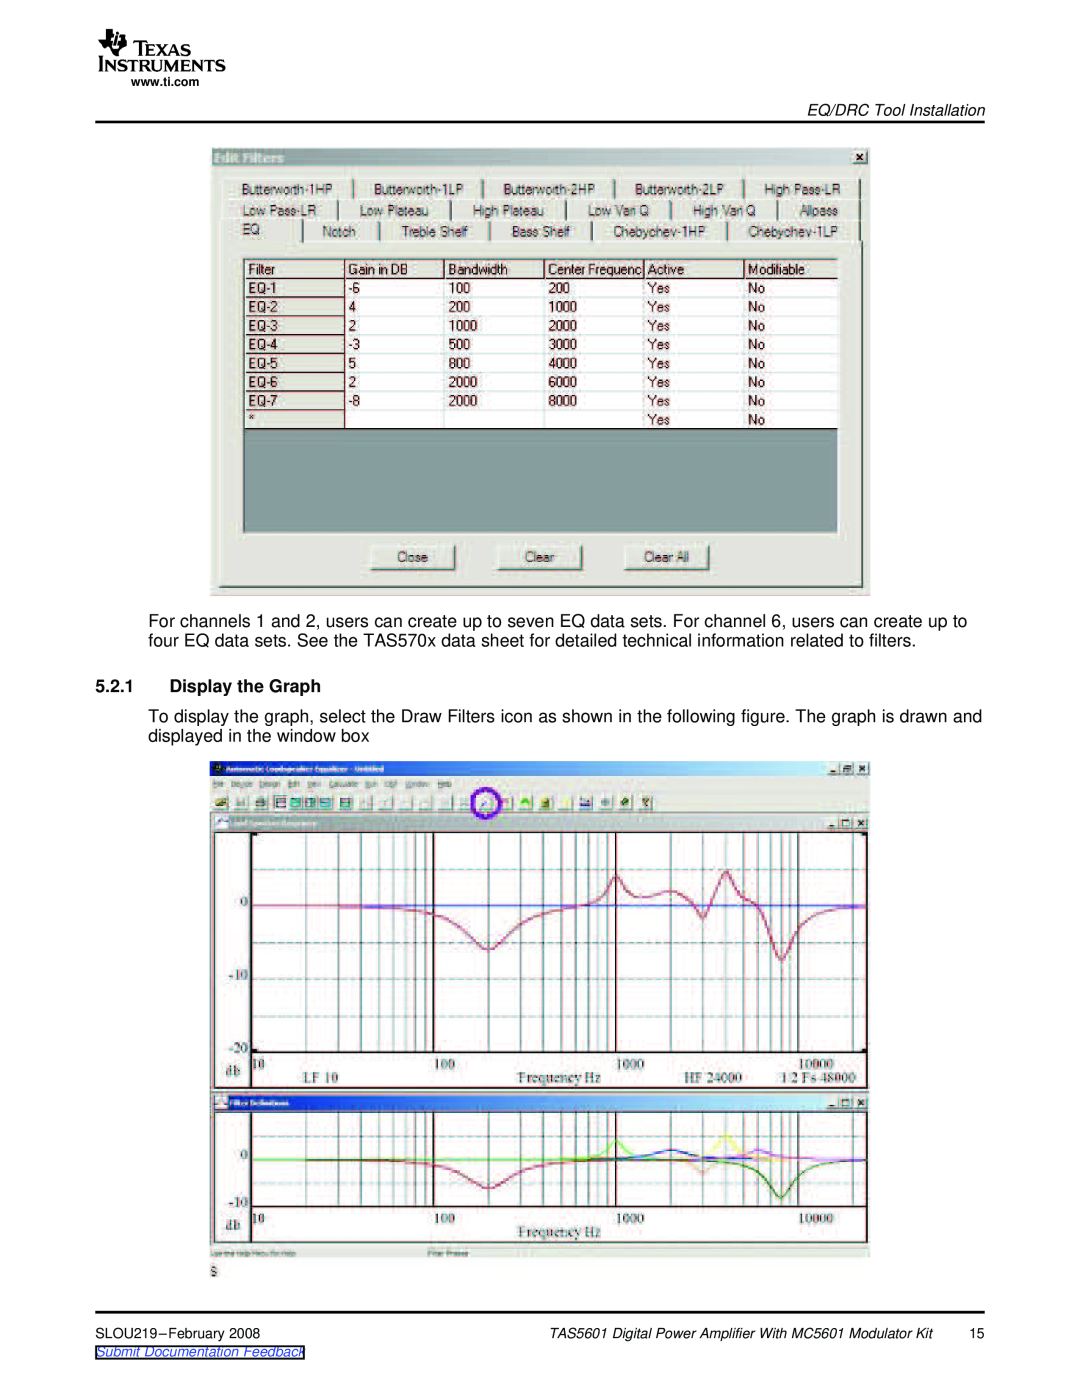 Texas Instruments TAS5601 manual 5.2.1Display the Graph, SLOU219-February2008 